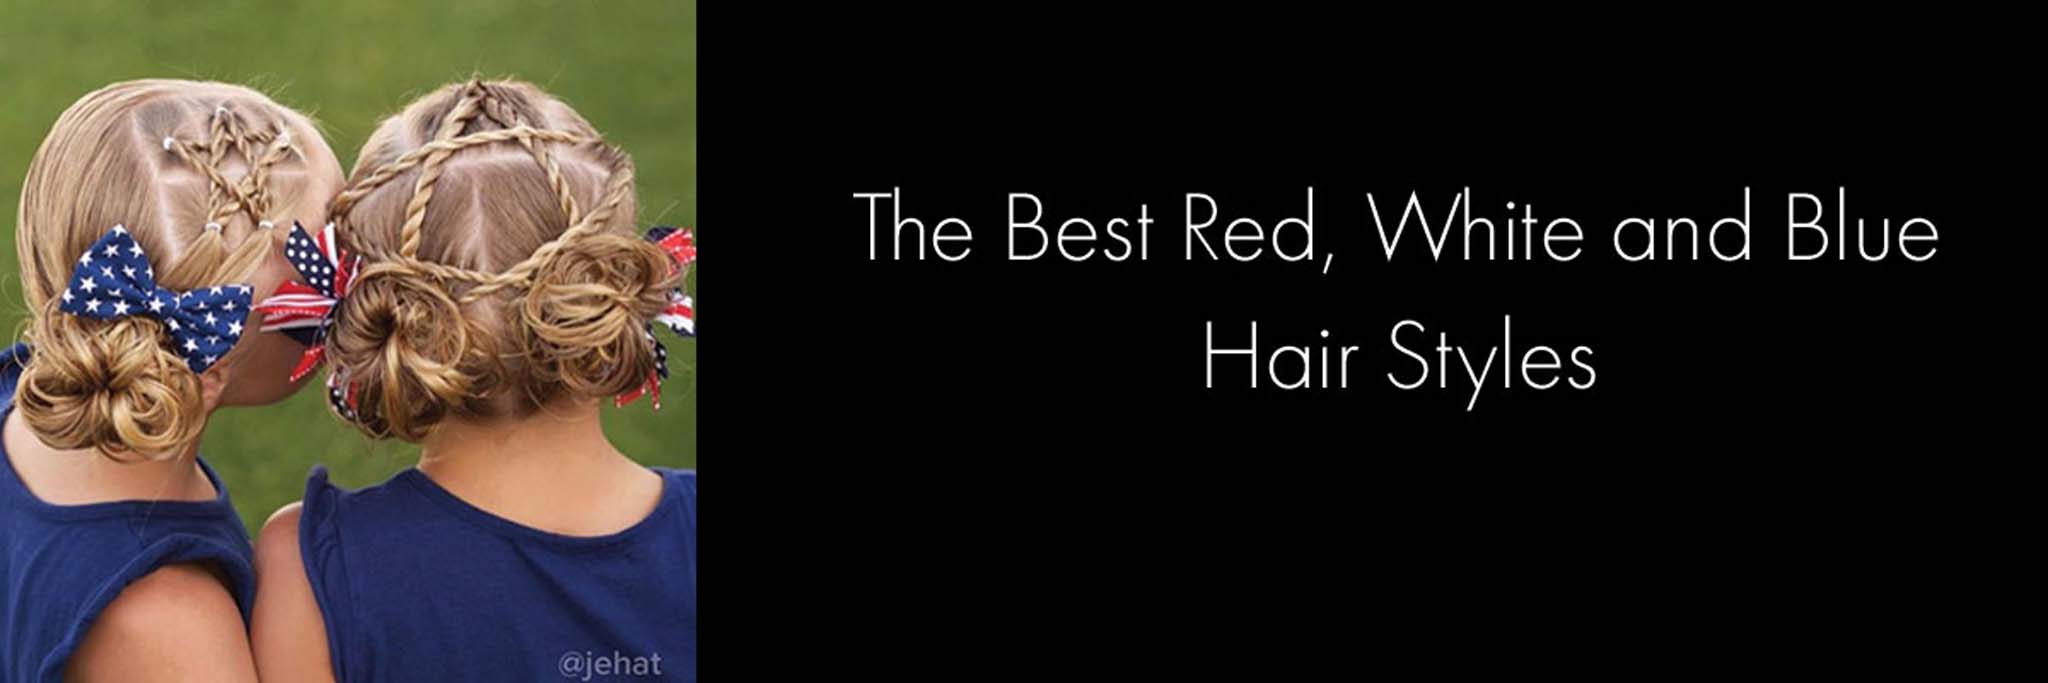 the best red white and blue hair styles